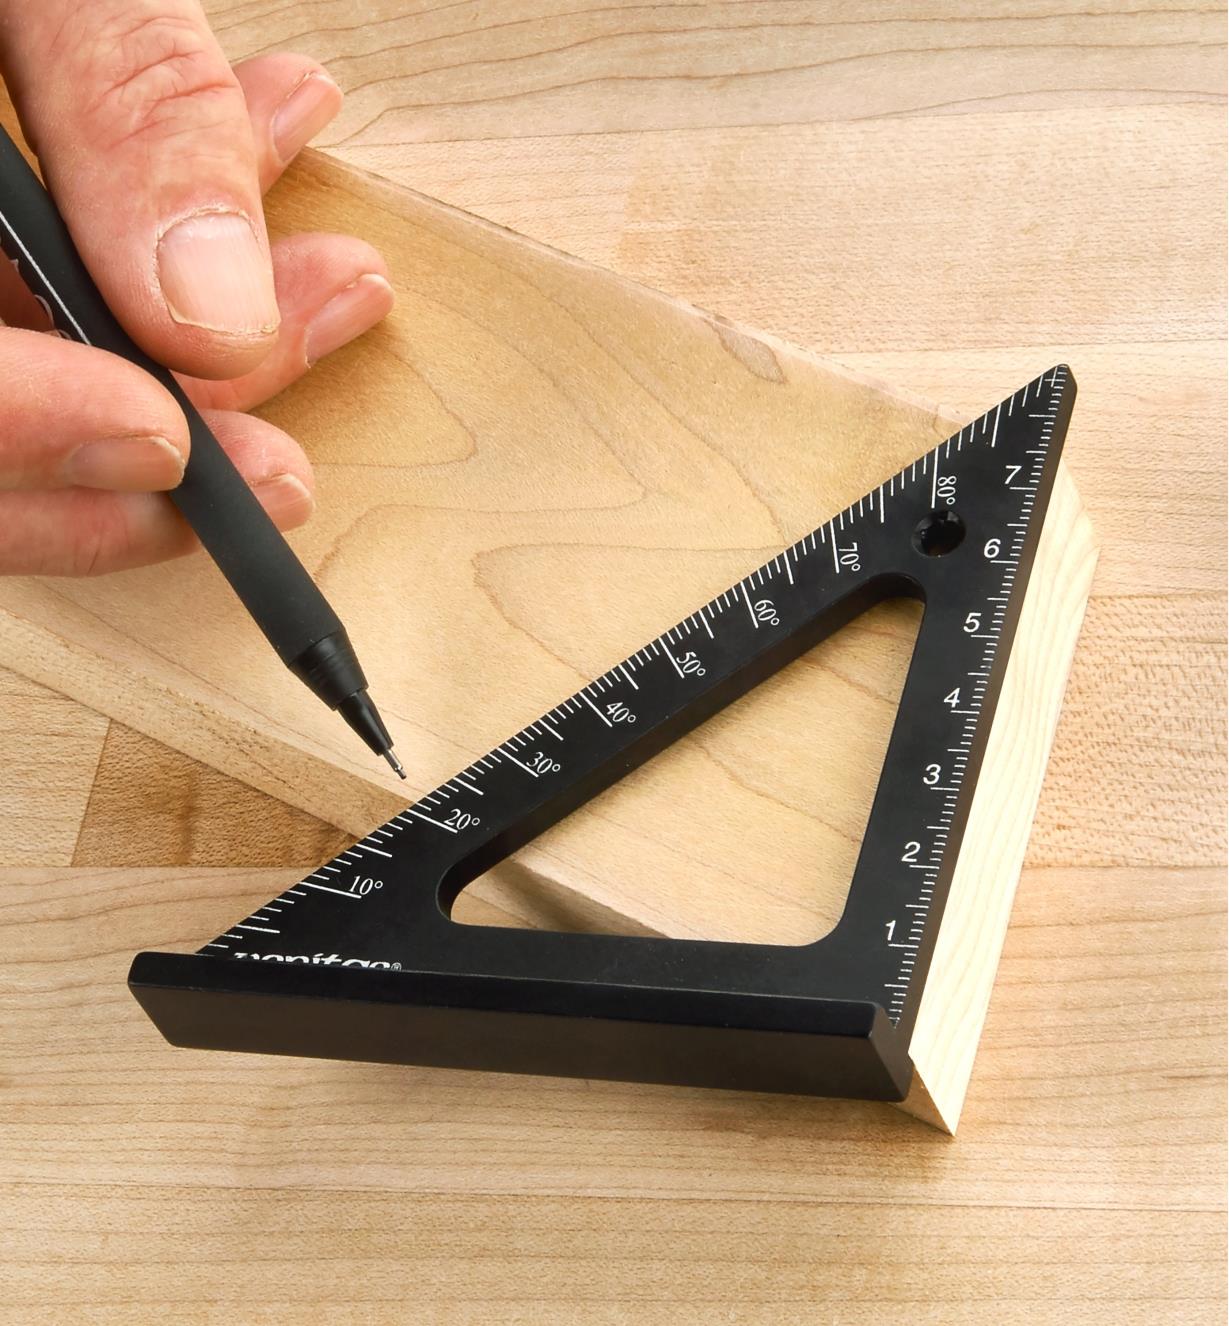 Using the protractor scale marked on a Veritas 85mm Pocket Layout Square to check an angled cut